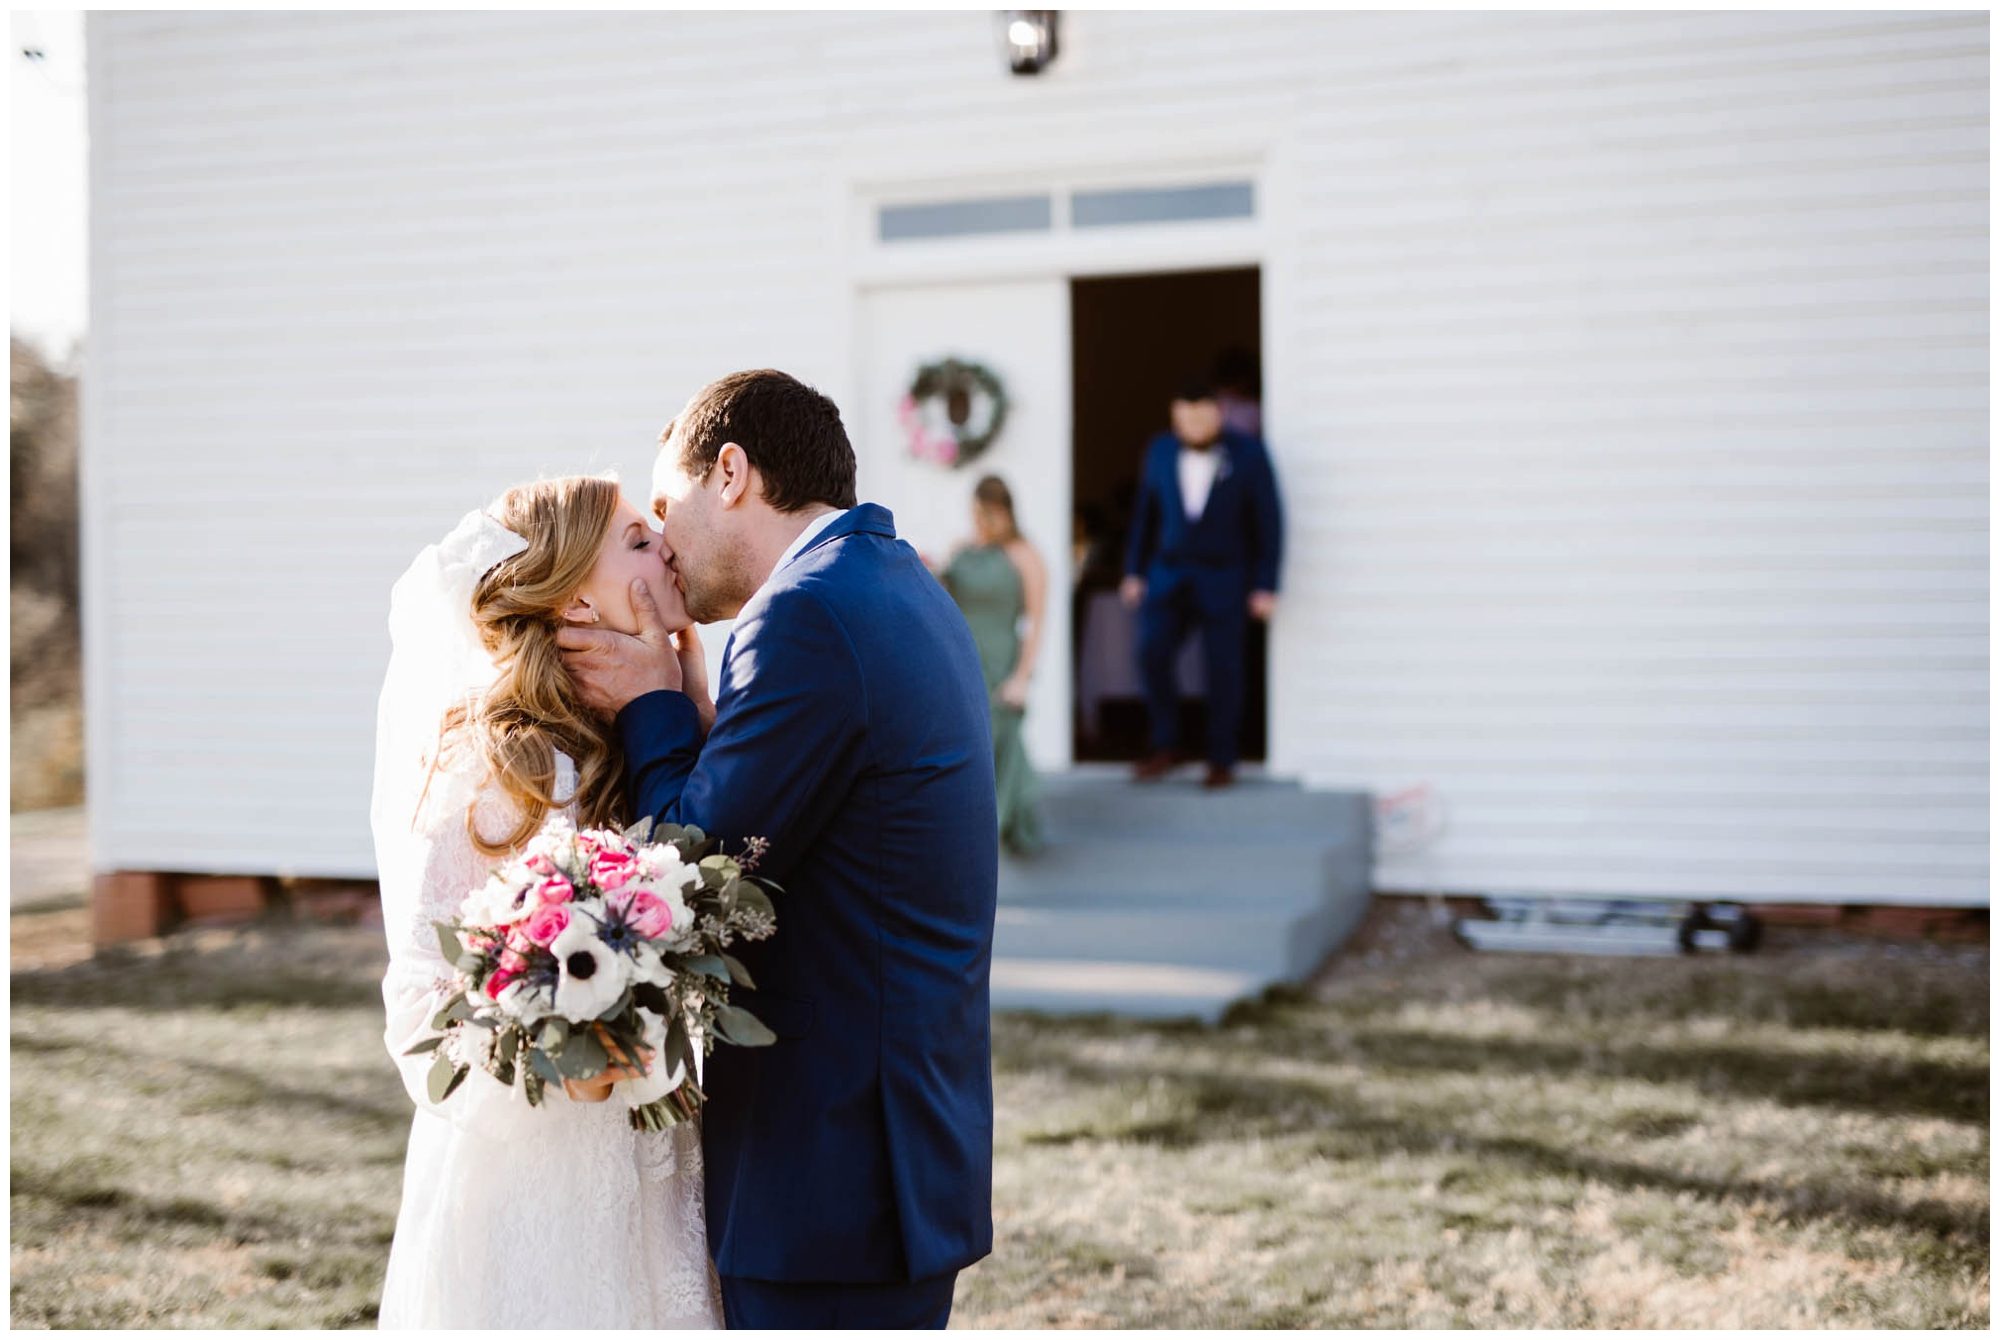 bride and groom kiss outside of church on wedding day